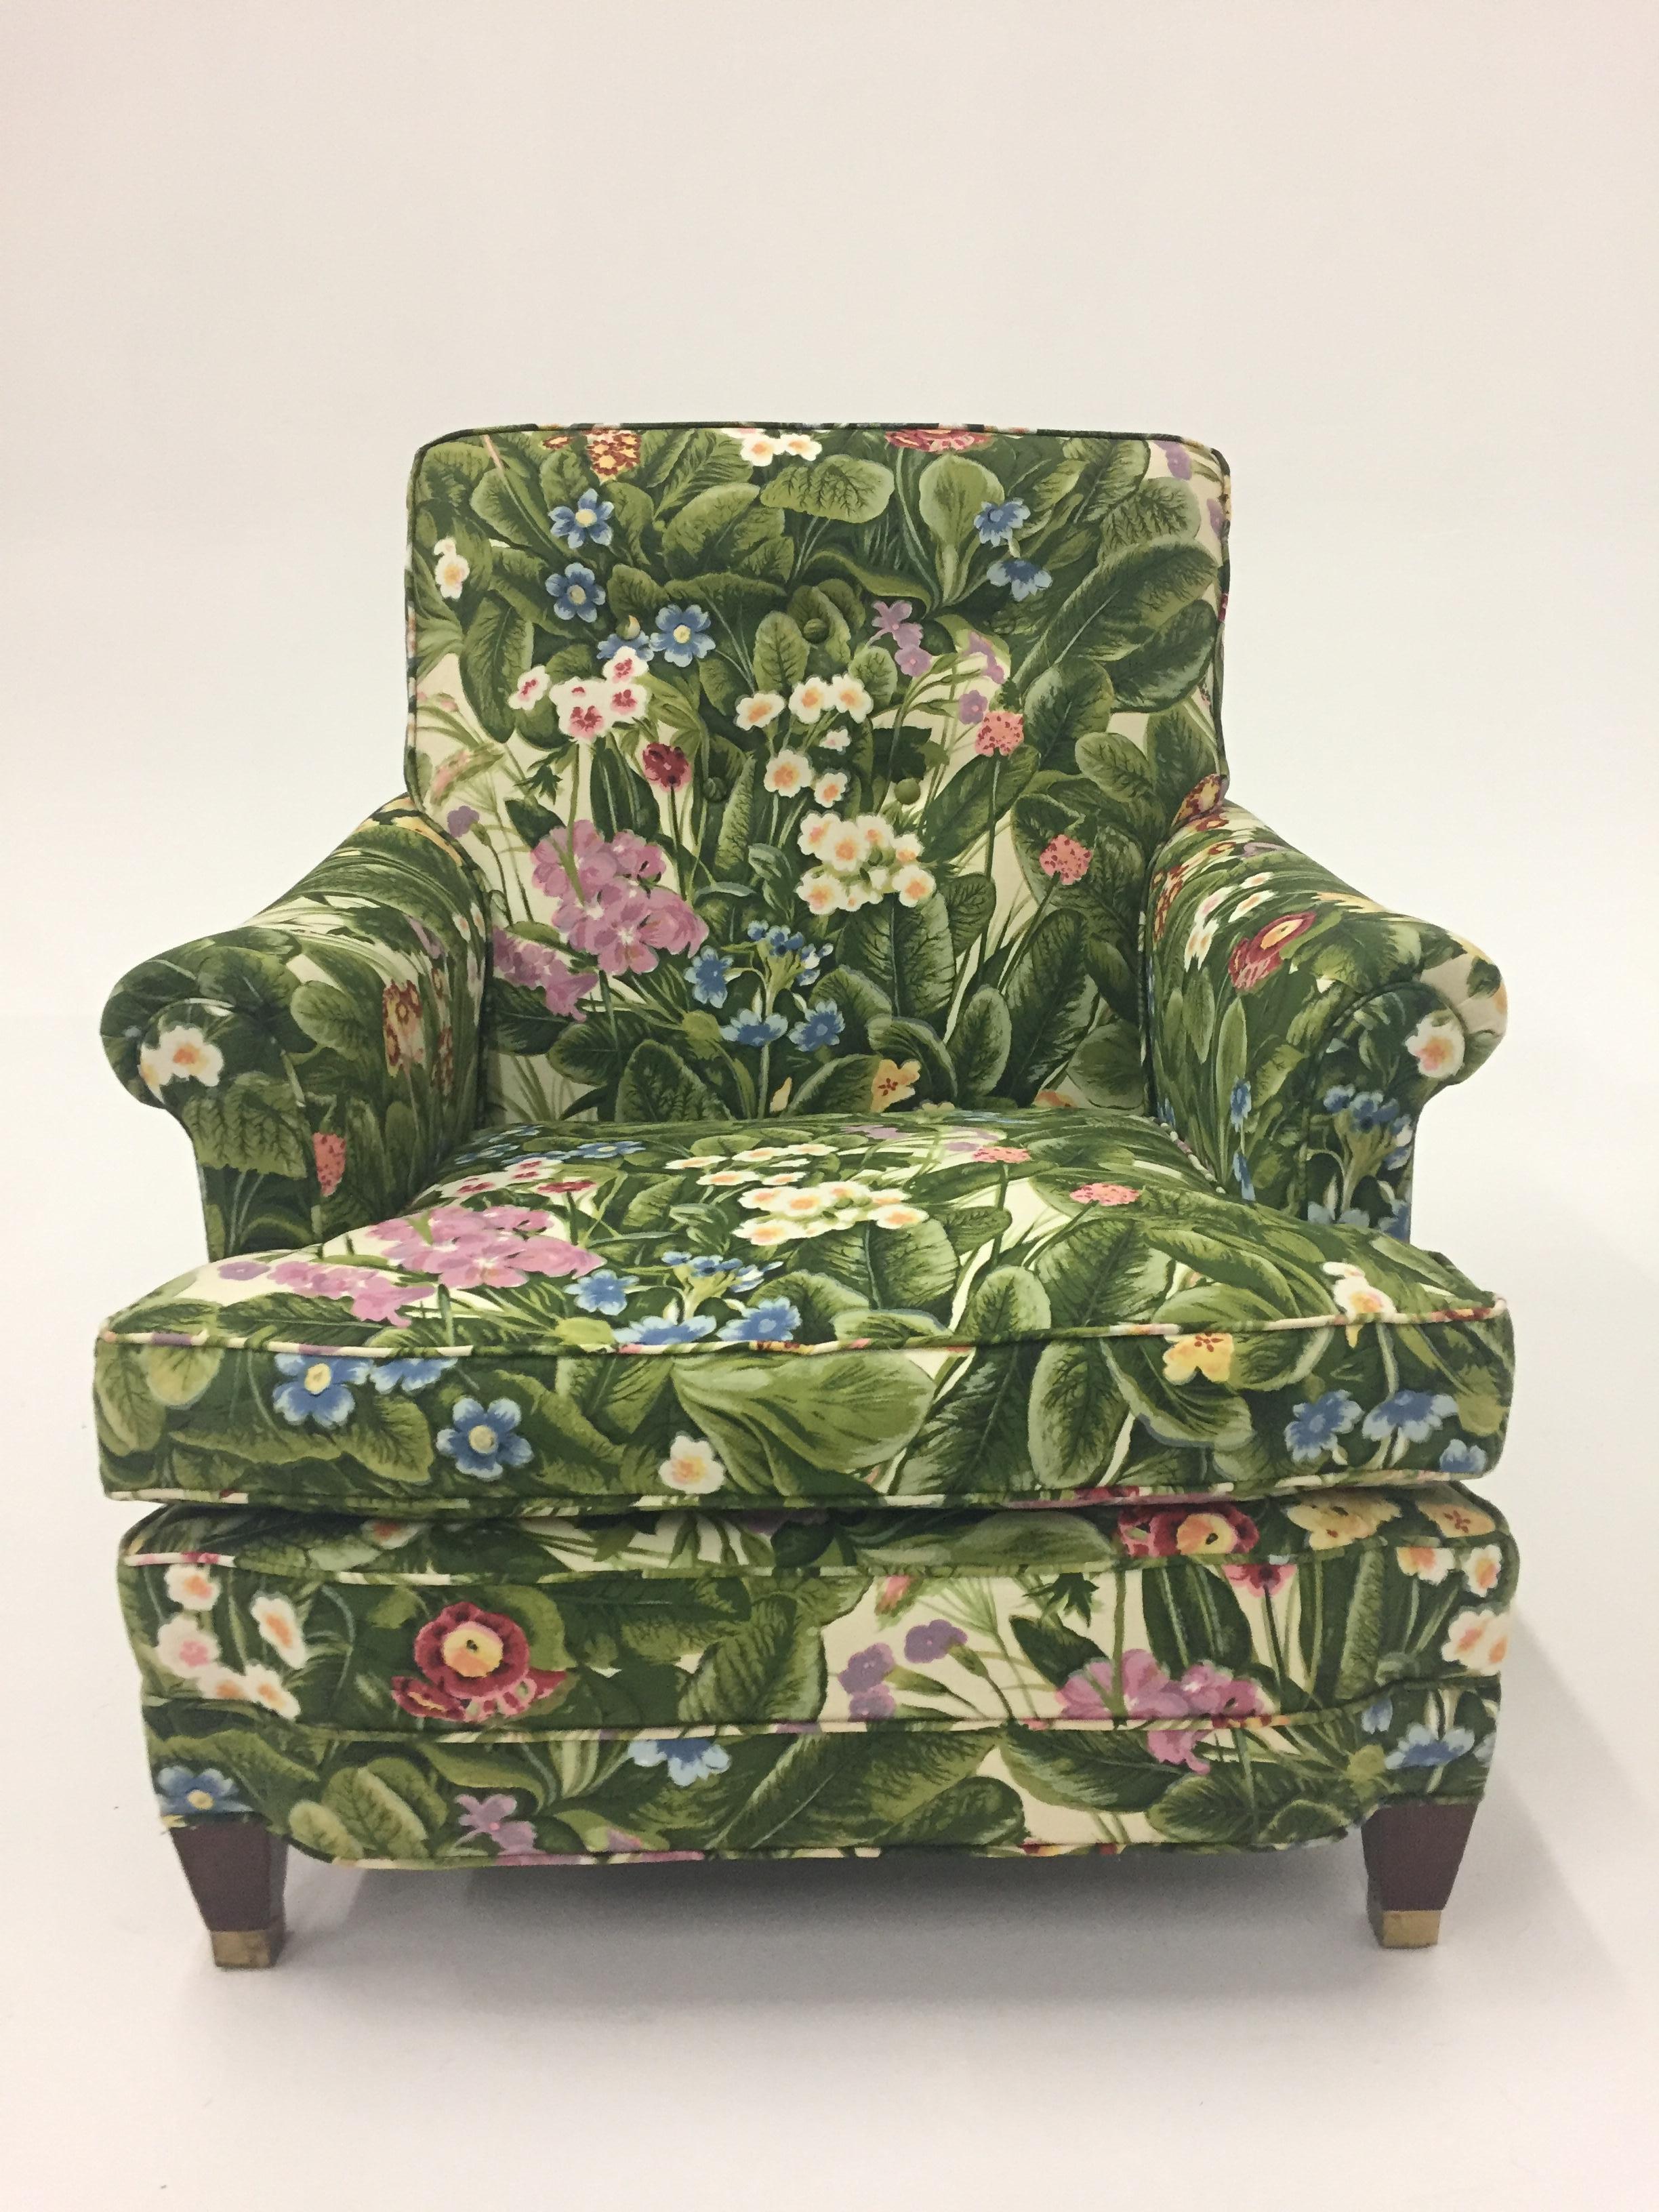 A beautiful quality matching upholstered Classic club chair and ottoman with a Spring inspired contemporary fresh floral fabric. Handsome mahogany feel and there are brass casters on the ottoman. 
seat height 16
Measures: ottoman 24W x 18D x 14H.